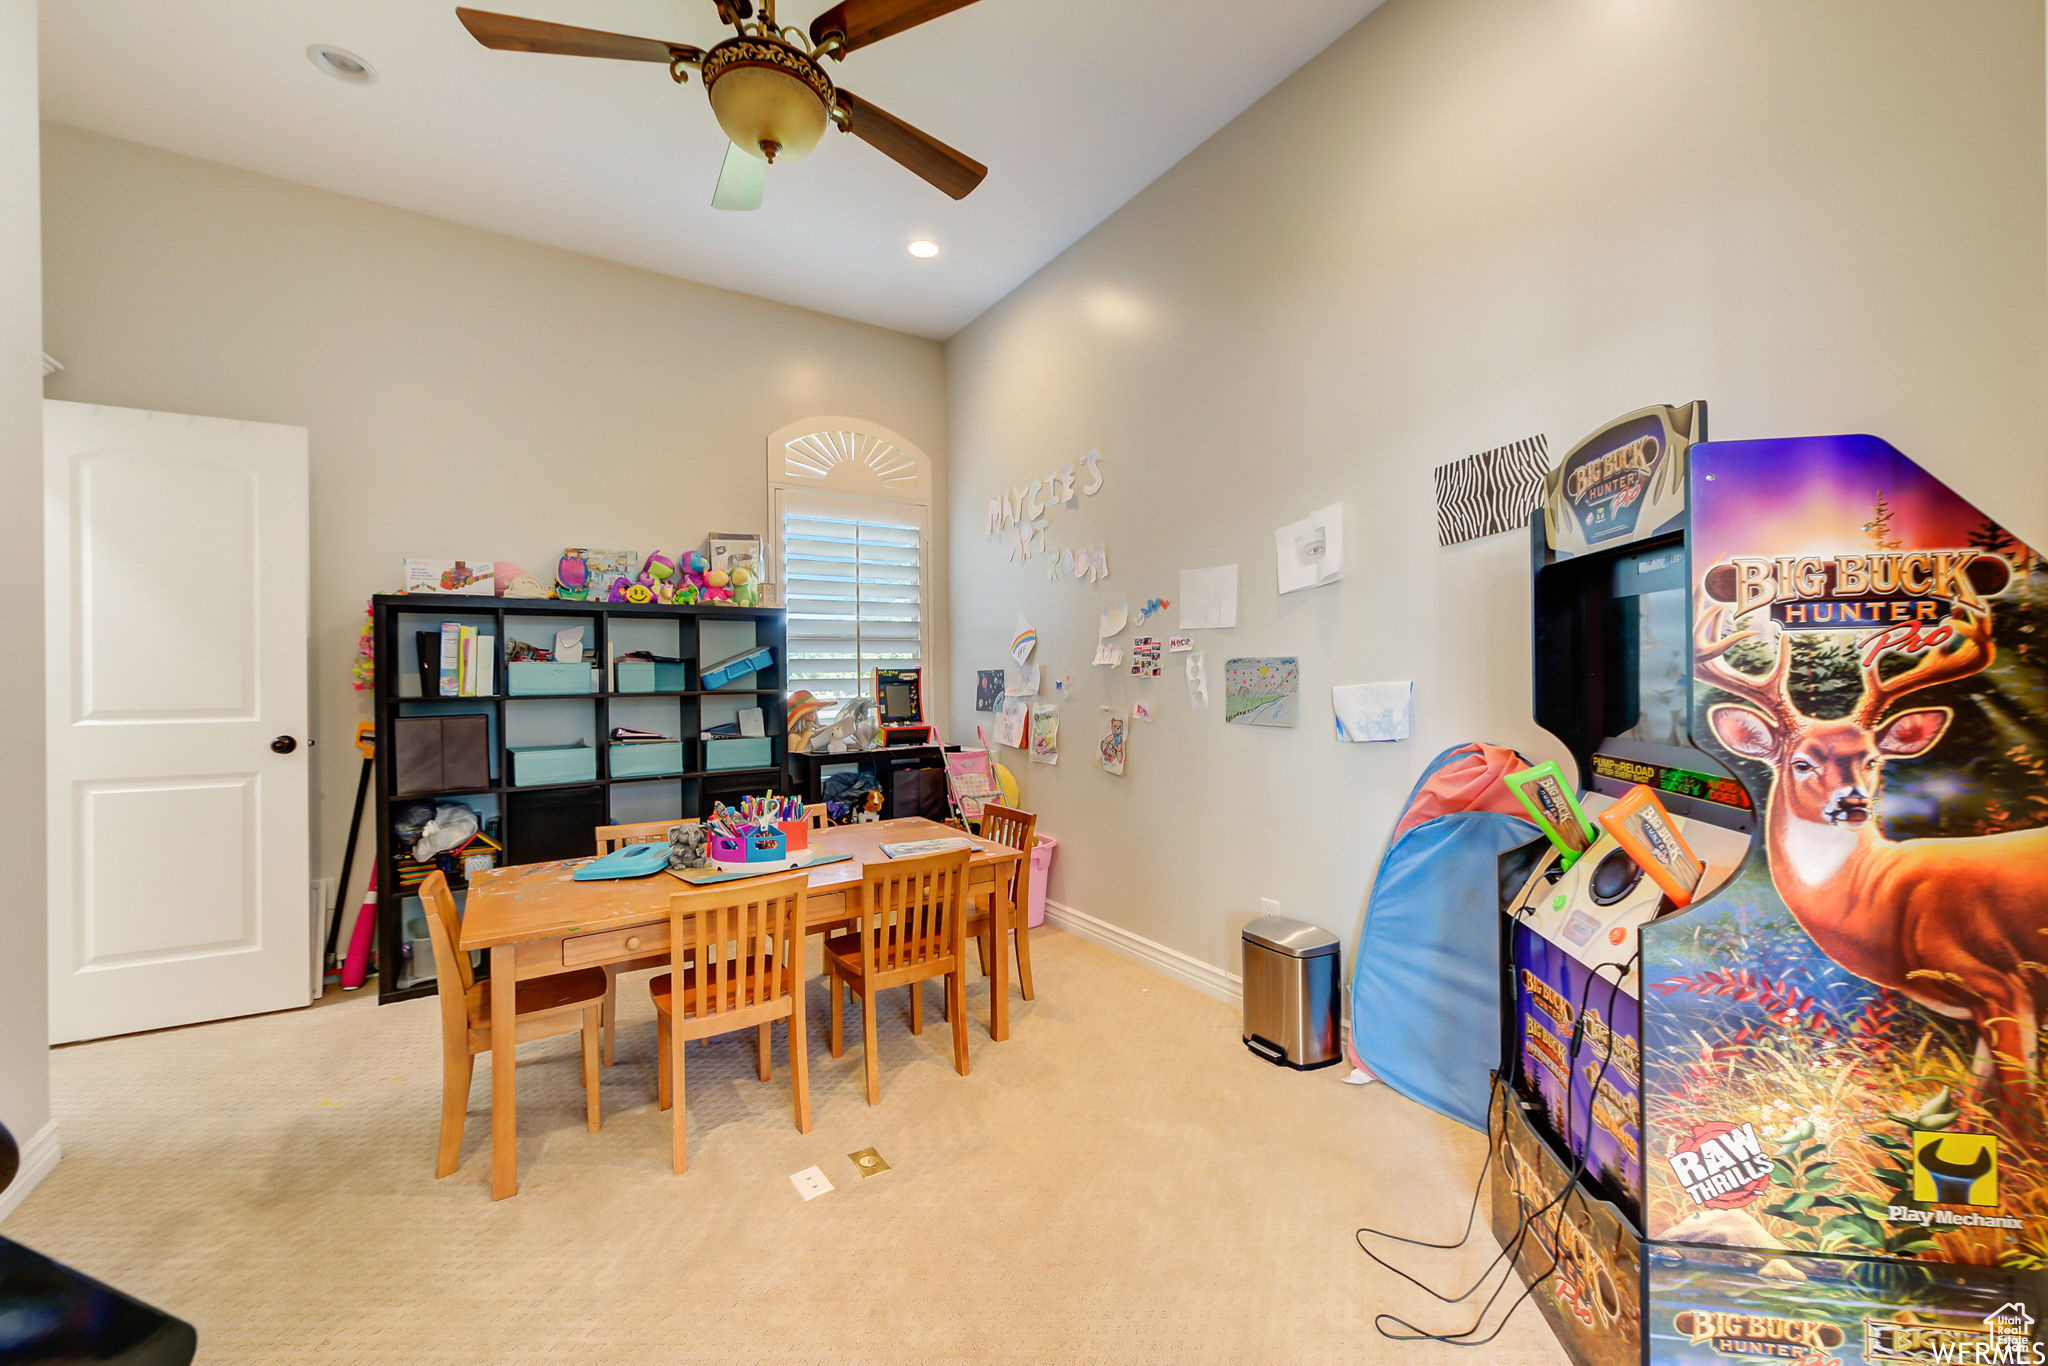 Playroom with ceiling fan and light carpet